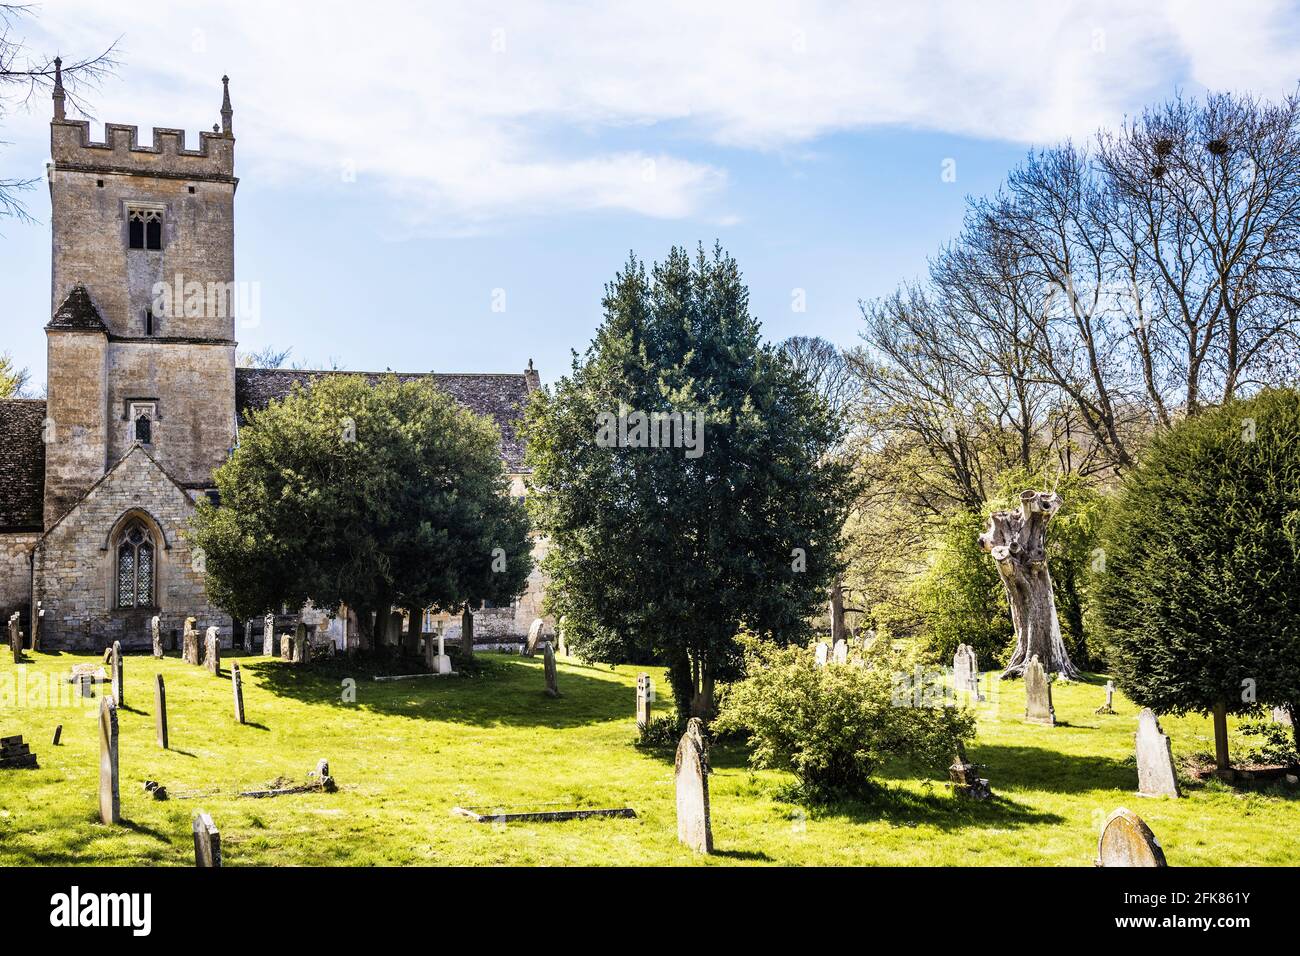 St Eadburgha's Church at Broadway in the Cotswolds. Stock Photo